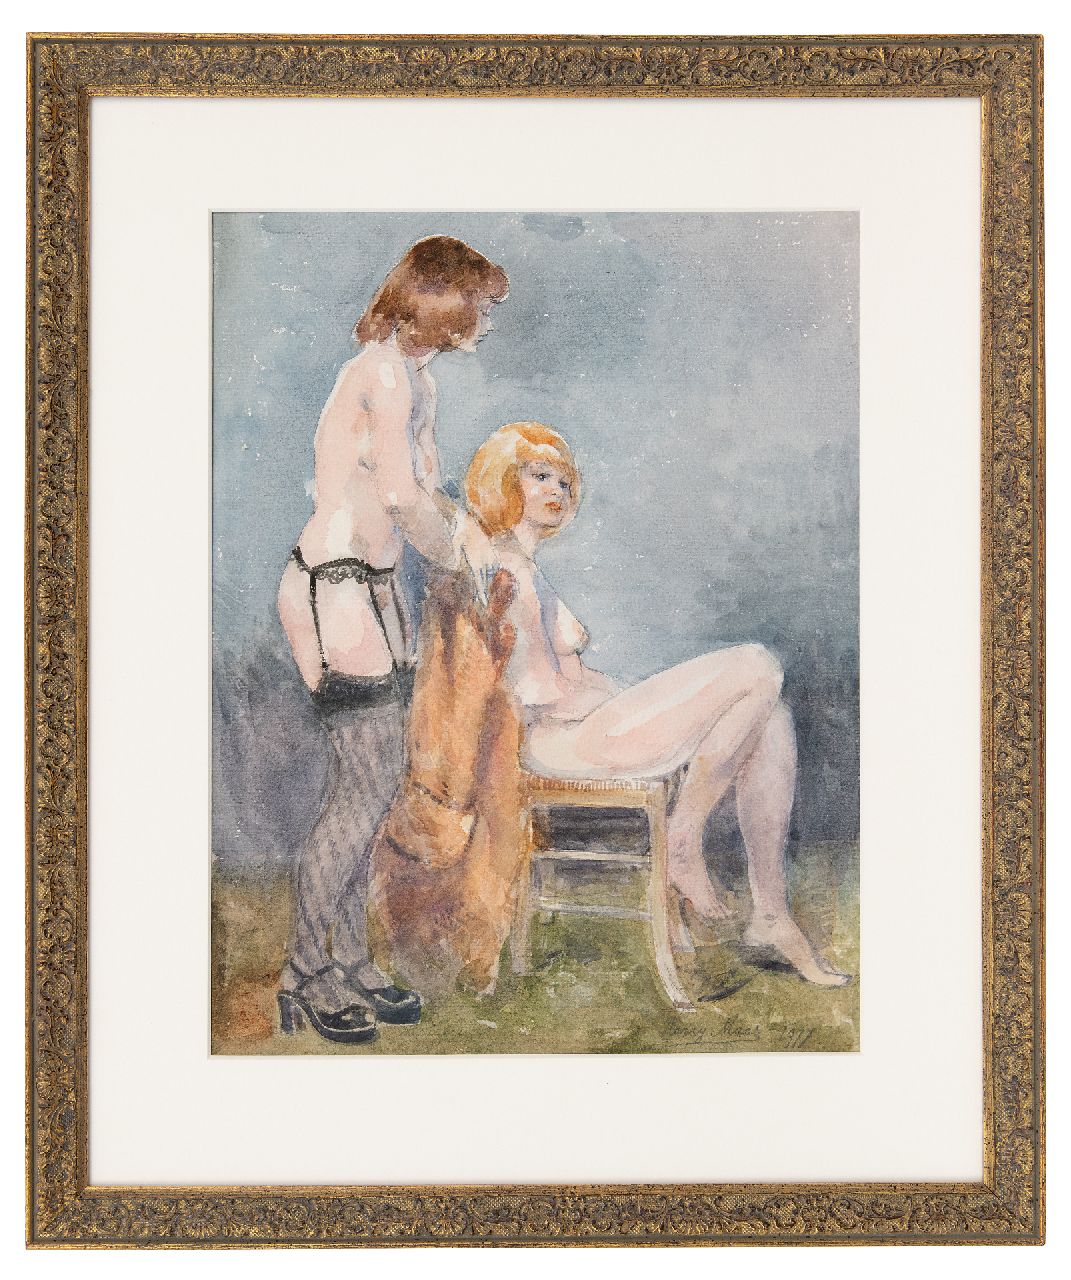 Maas H.F.H.  | Henri Frans Hubert 'Harry' Maas | Watercolours and drawings offered for sale | Standing and sitting nude, watercolour on paper 51.7 x 38.8 cm, signed l.r. and dated 1977